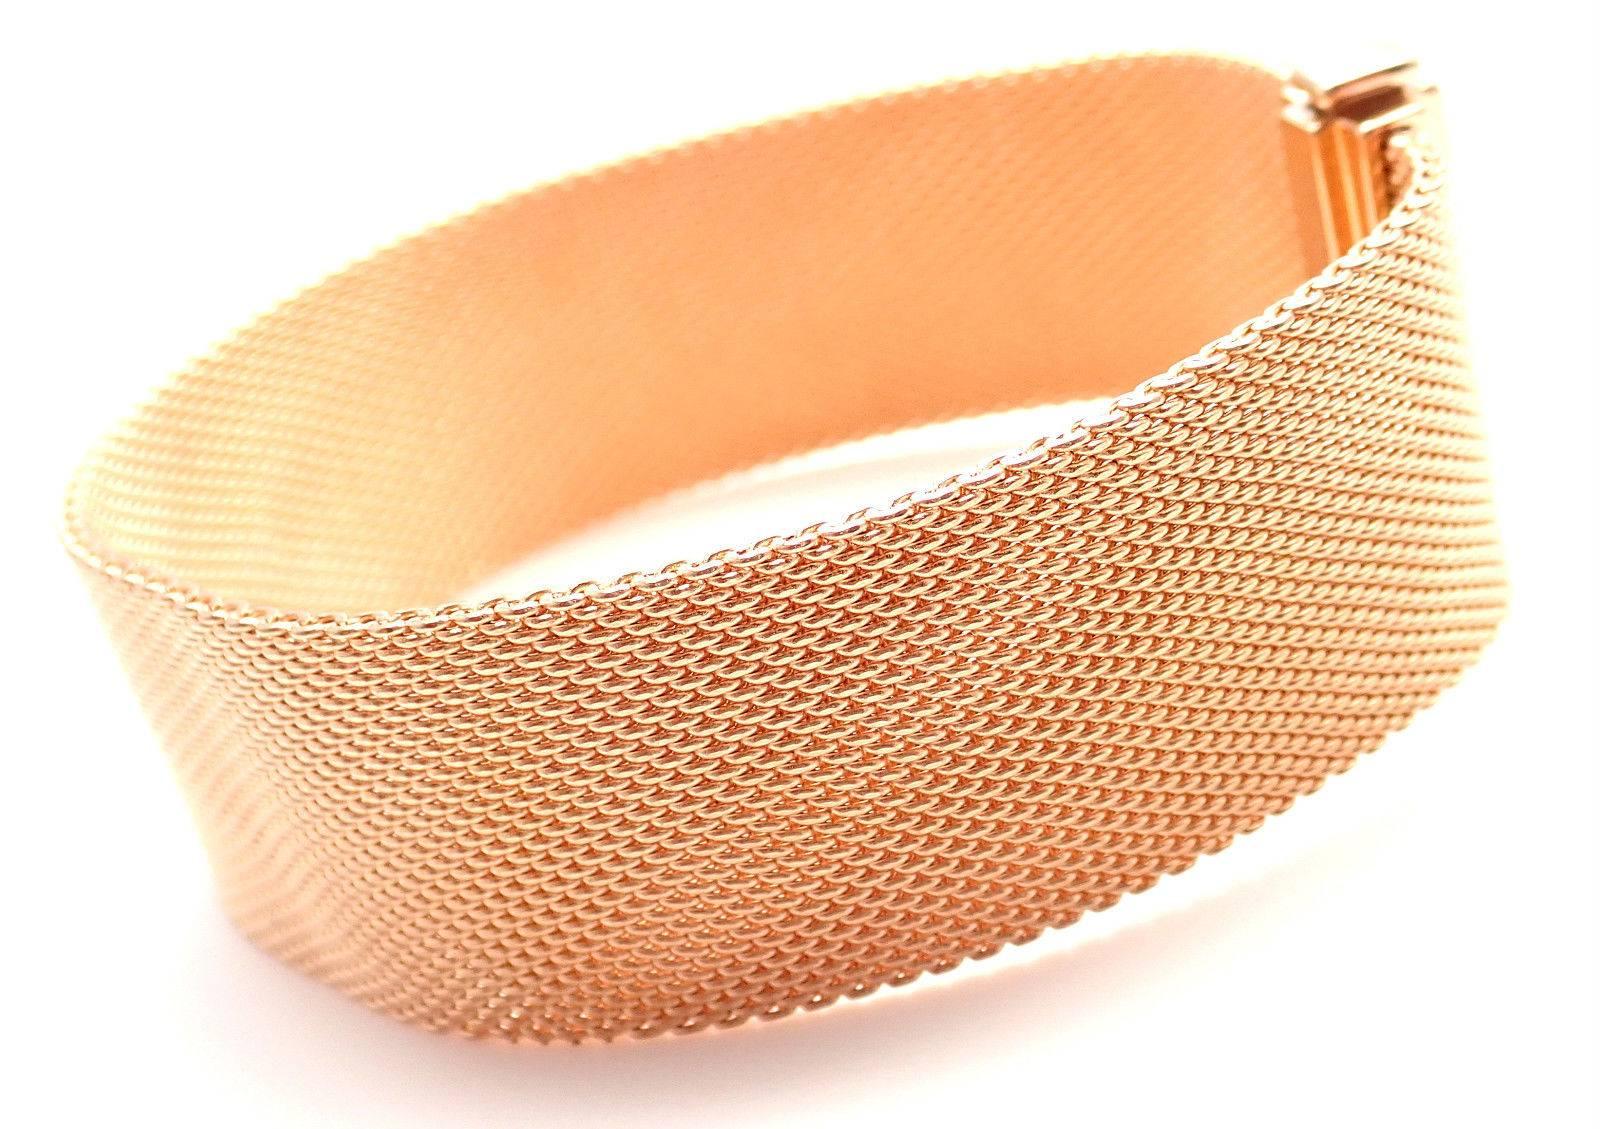 18k Rose Gold Diamond Somerset Wide Mesh Bracelet by Tiffany & Co. 
With 8 round brilliant cut diamonds VS1 clarity, 
G color 
Total weight approximately .21ct
Details: 
Length: 6.5